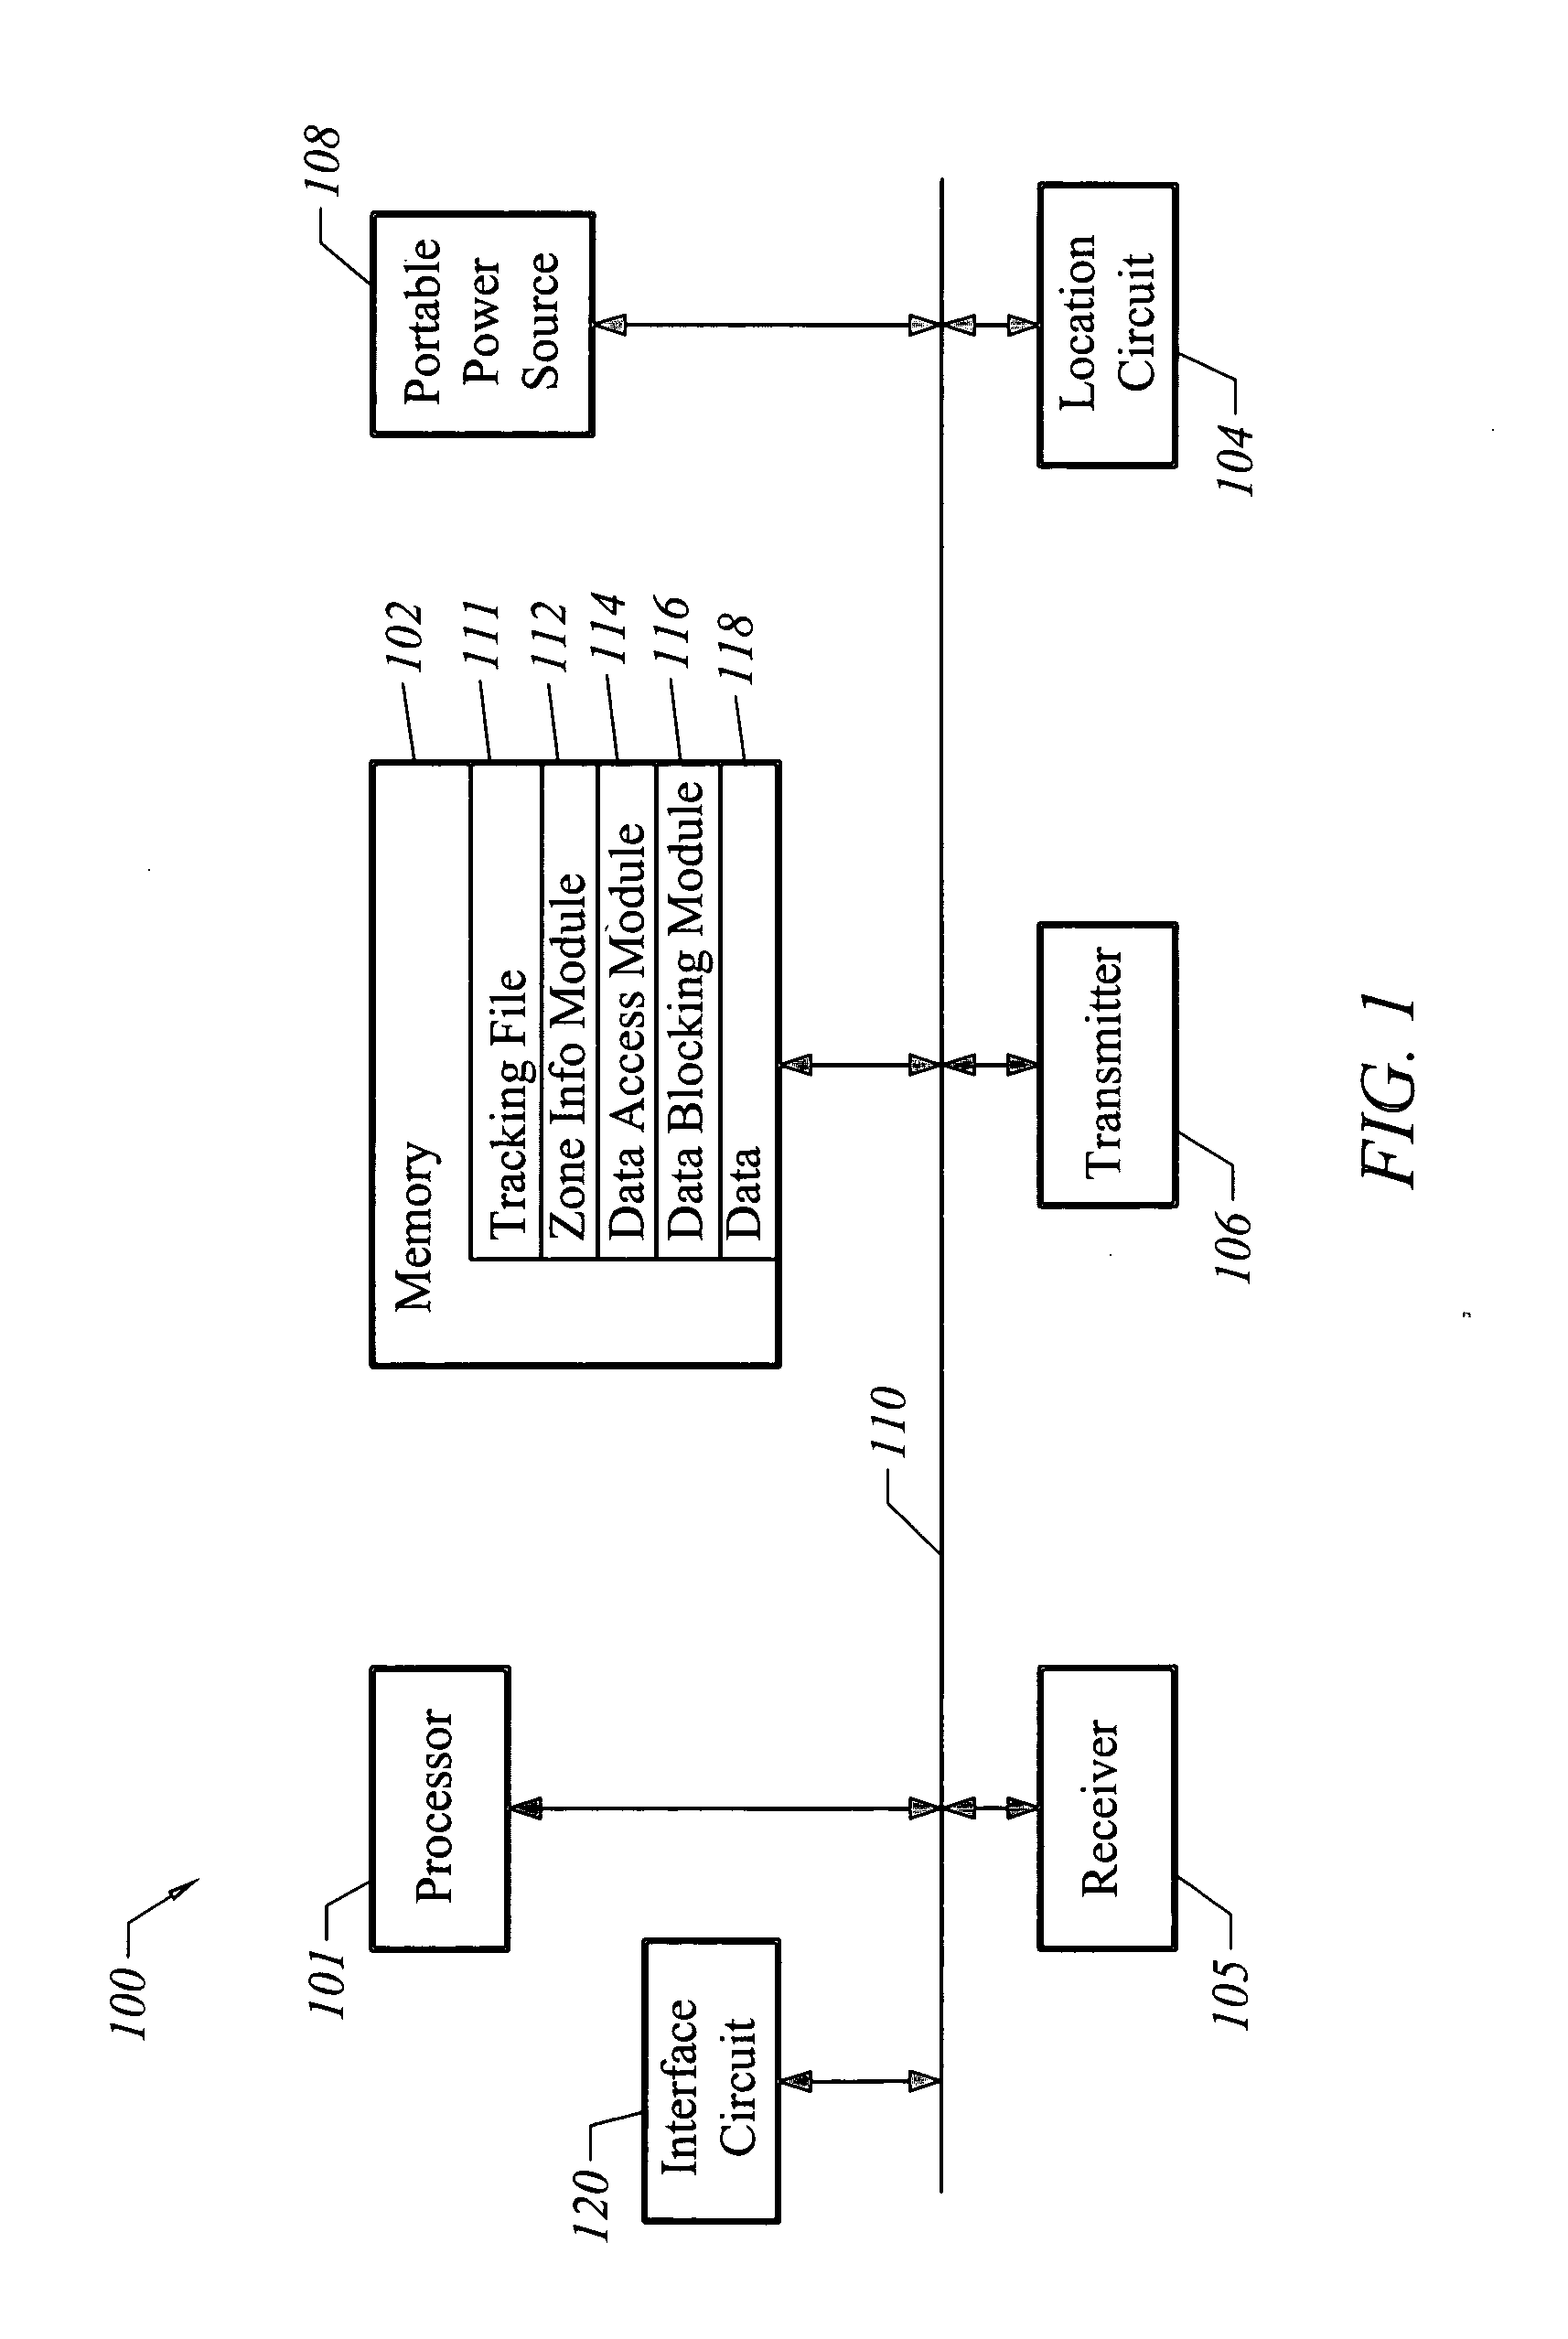 Apparatus and method for augmenting information security through the use of location data